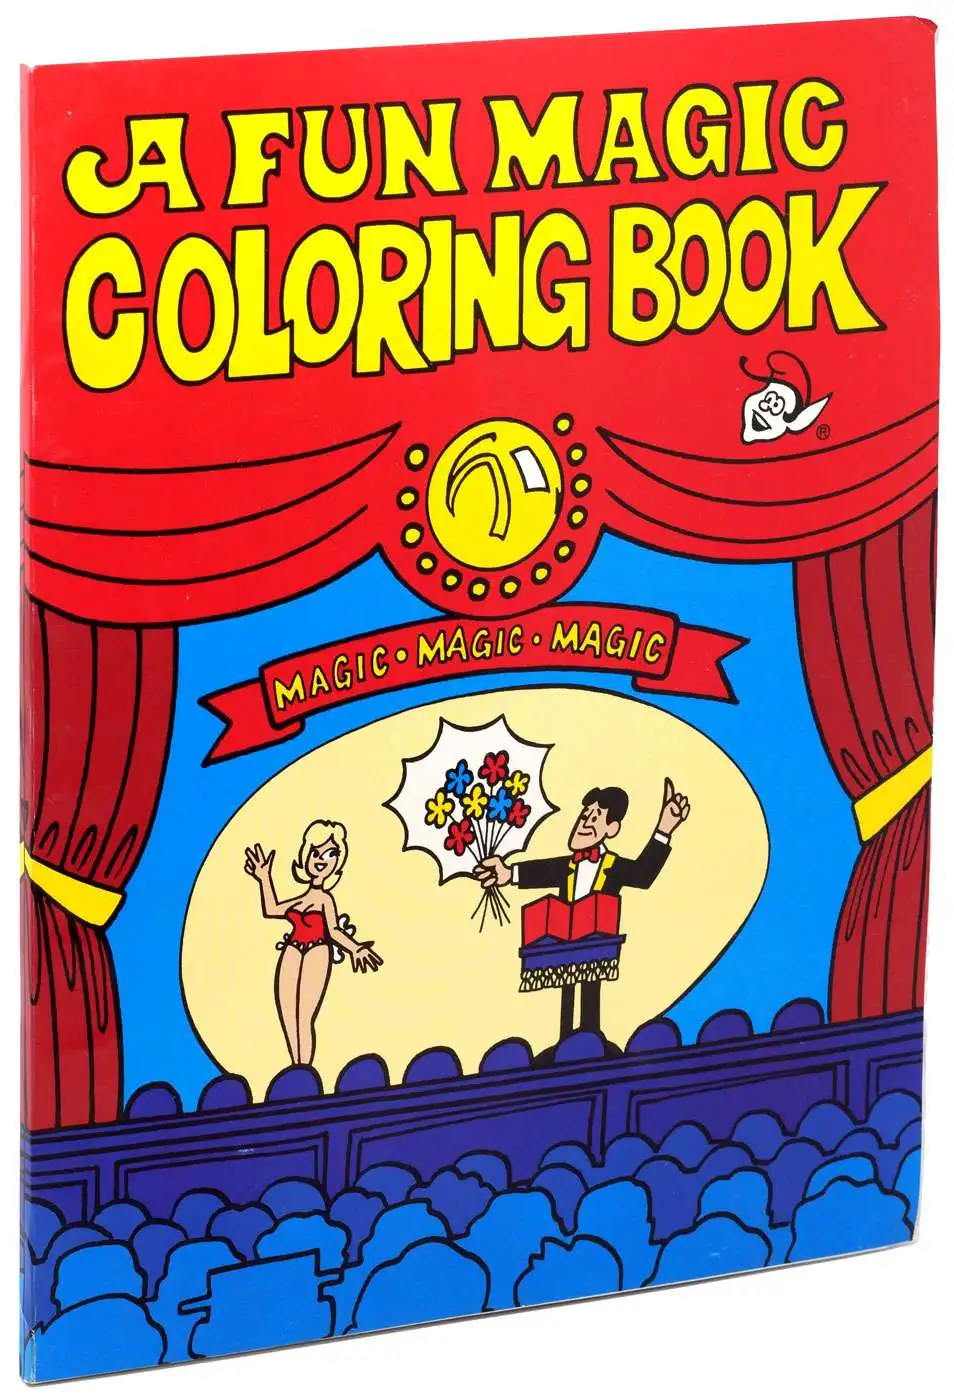 Funny Coloring Book Comedy Magic Books Close-up Street Magic Tricks Kids Toy 